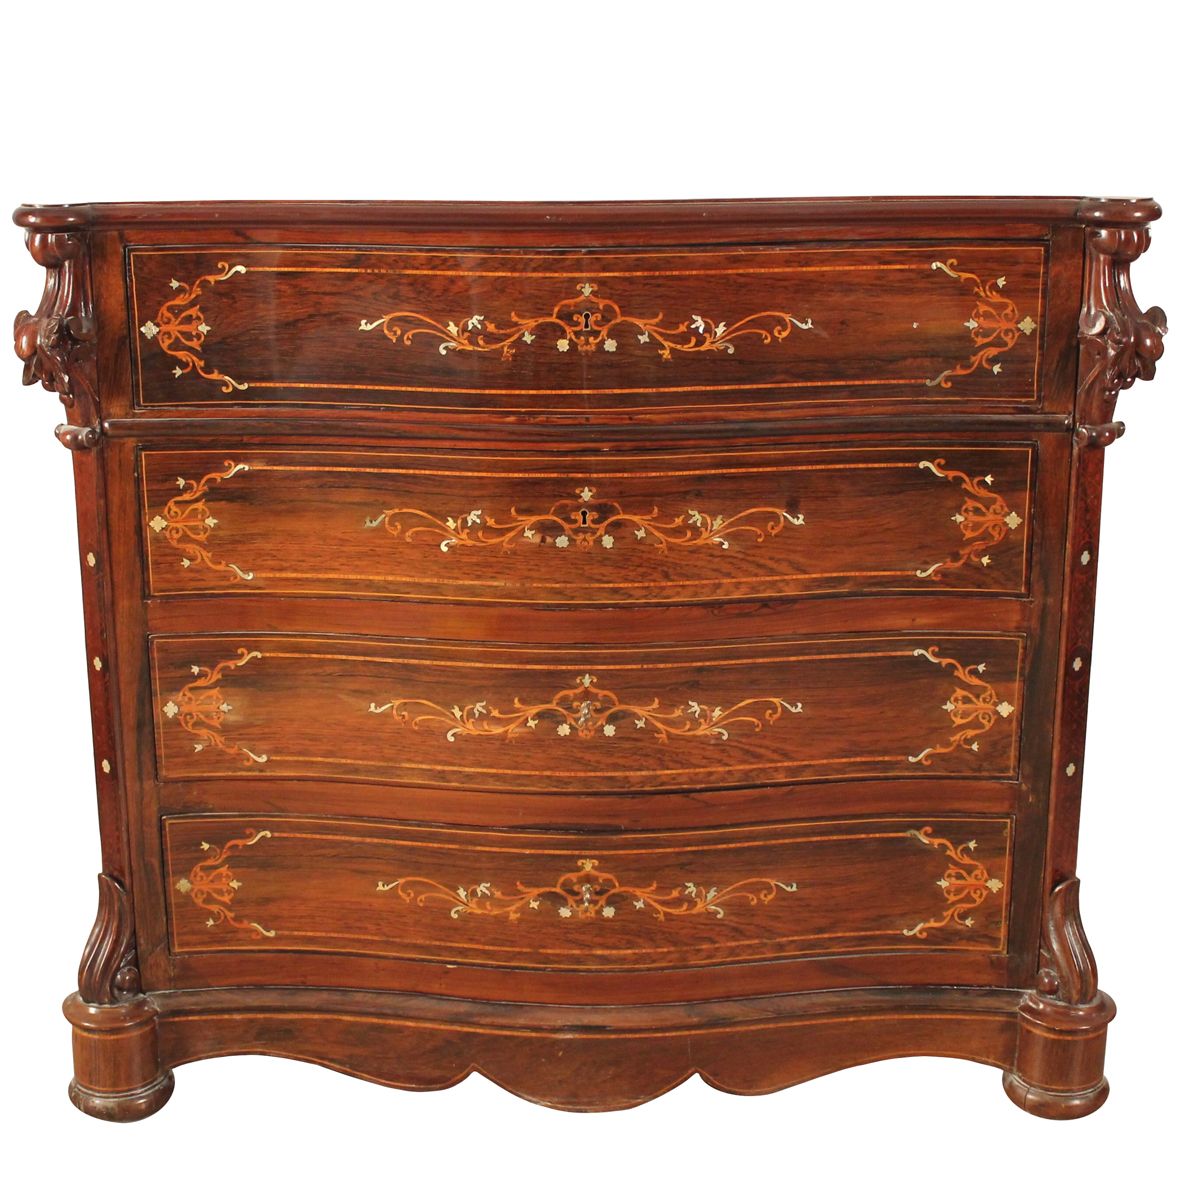 CASSETTONE - COMMODE Three drawers with flap in the upper part. Rosewood with ri&hellip;